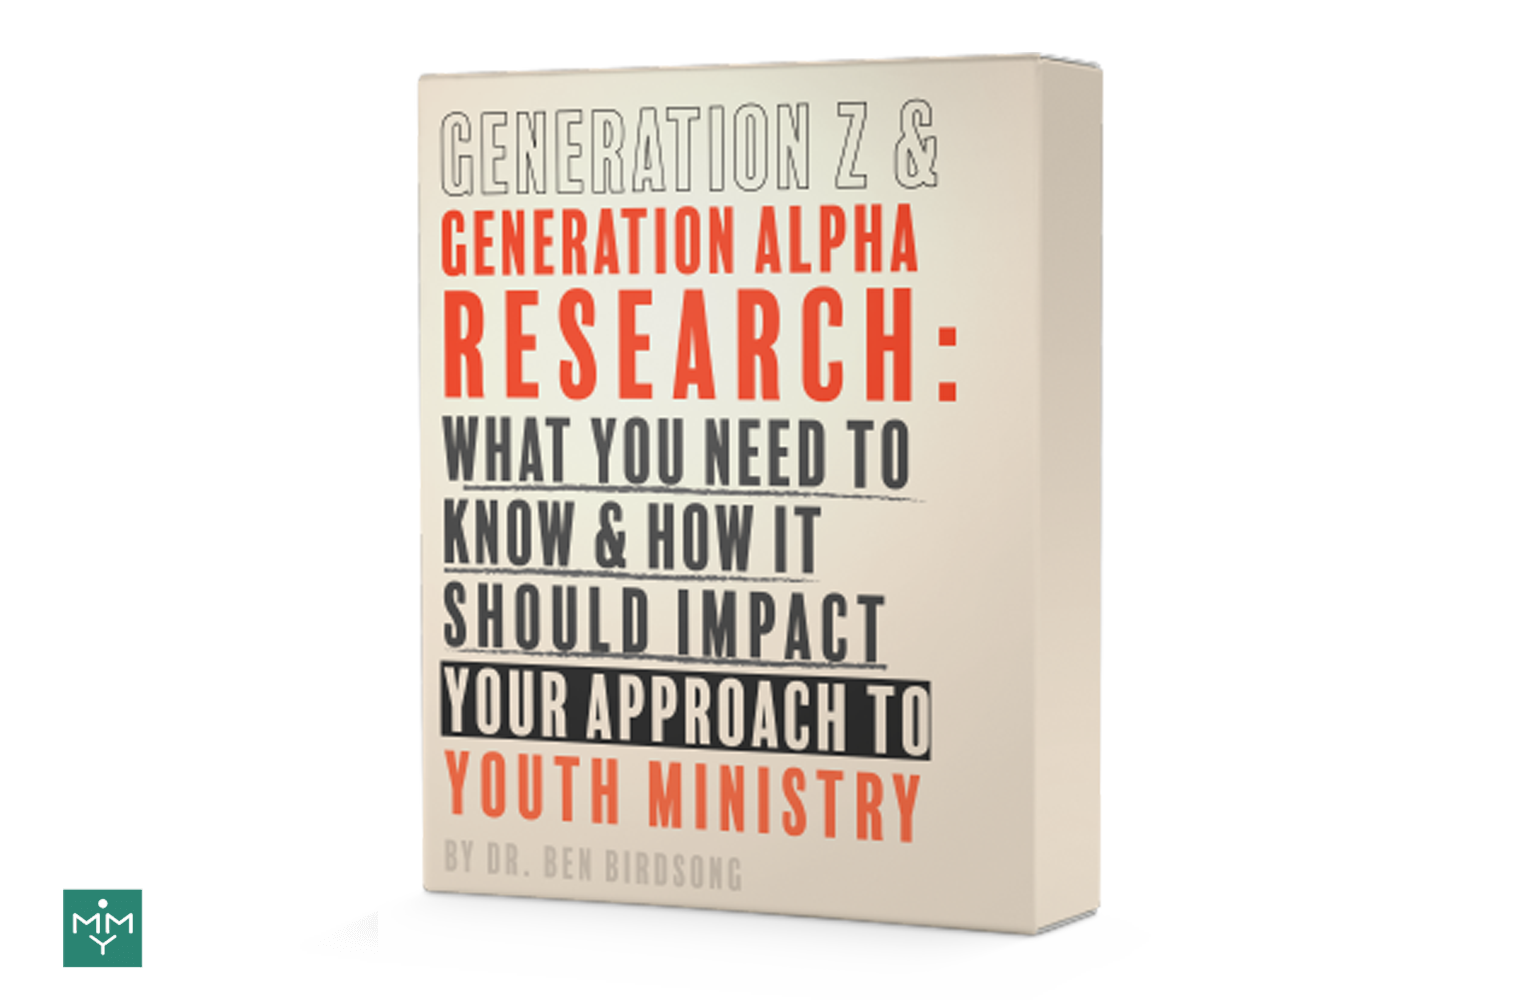 [5 Lesson Course] Generation Z & Generation Alpha Research: What You Need To Know & How It Should Impact Your Approach To Youth Ministry